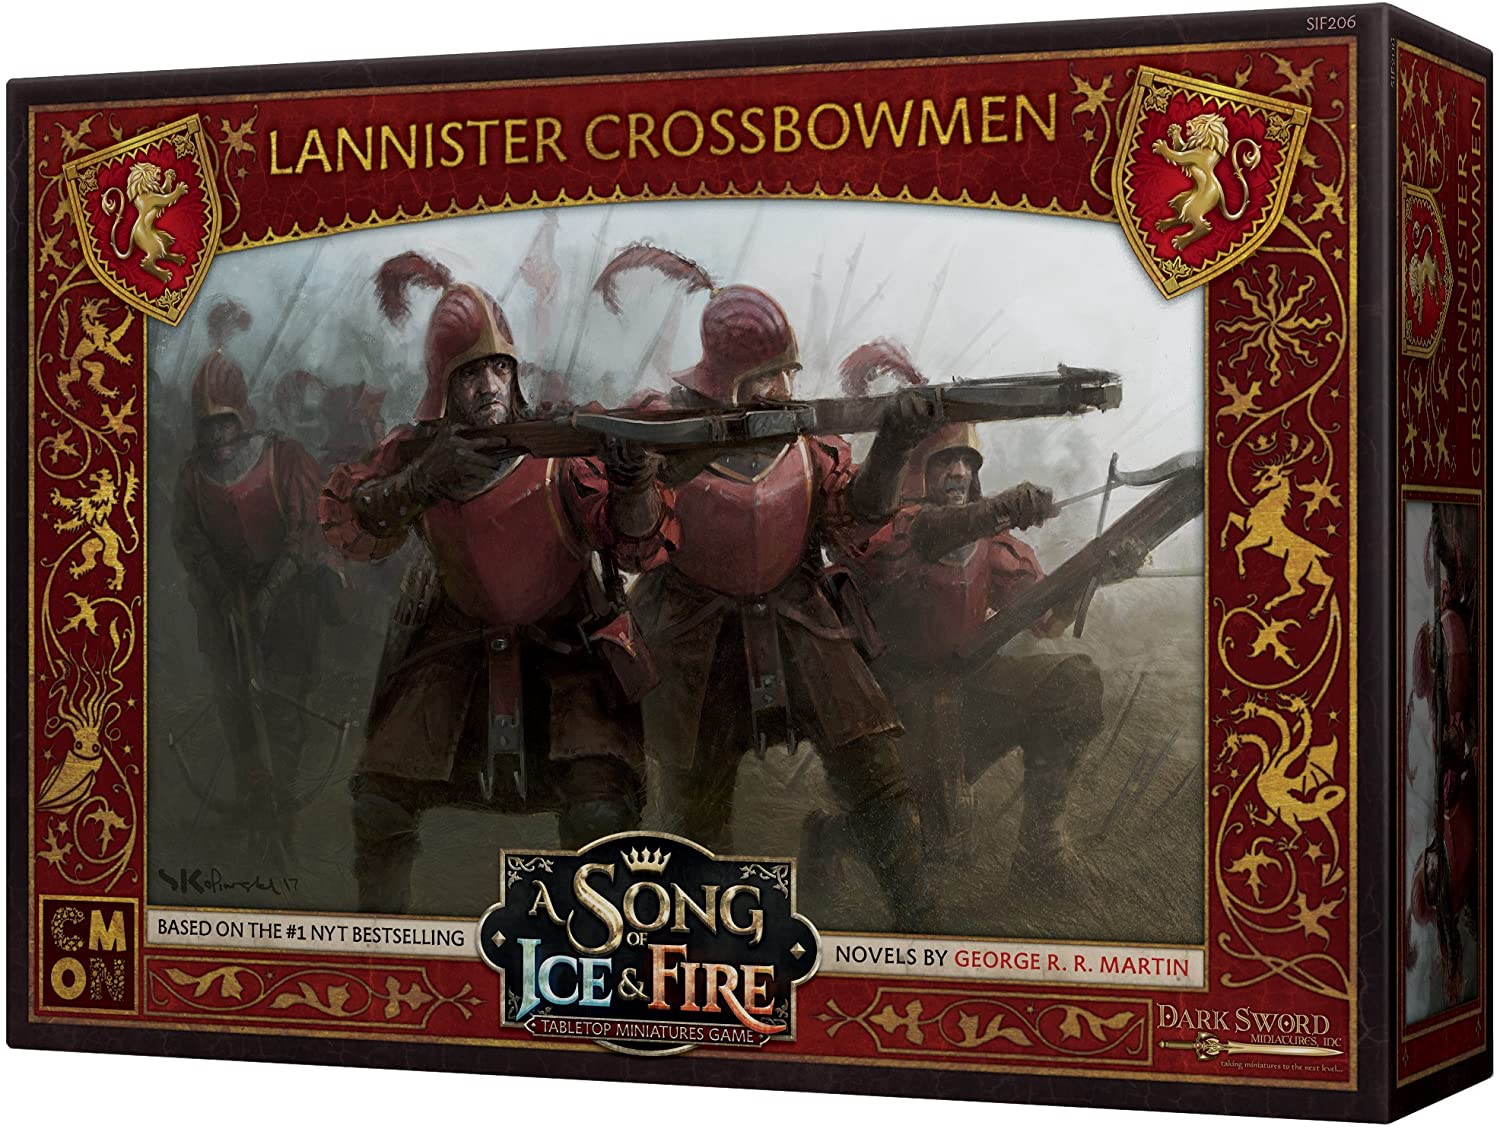 A Song of Ice and Fire: Tabletop Miniatures Game Lannister Crossbowmen Unit Box, by CMON - image 1 of 9